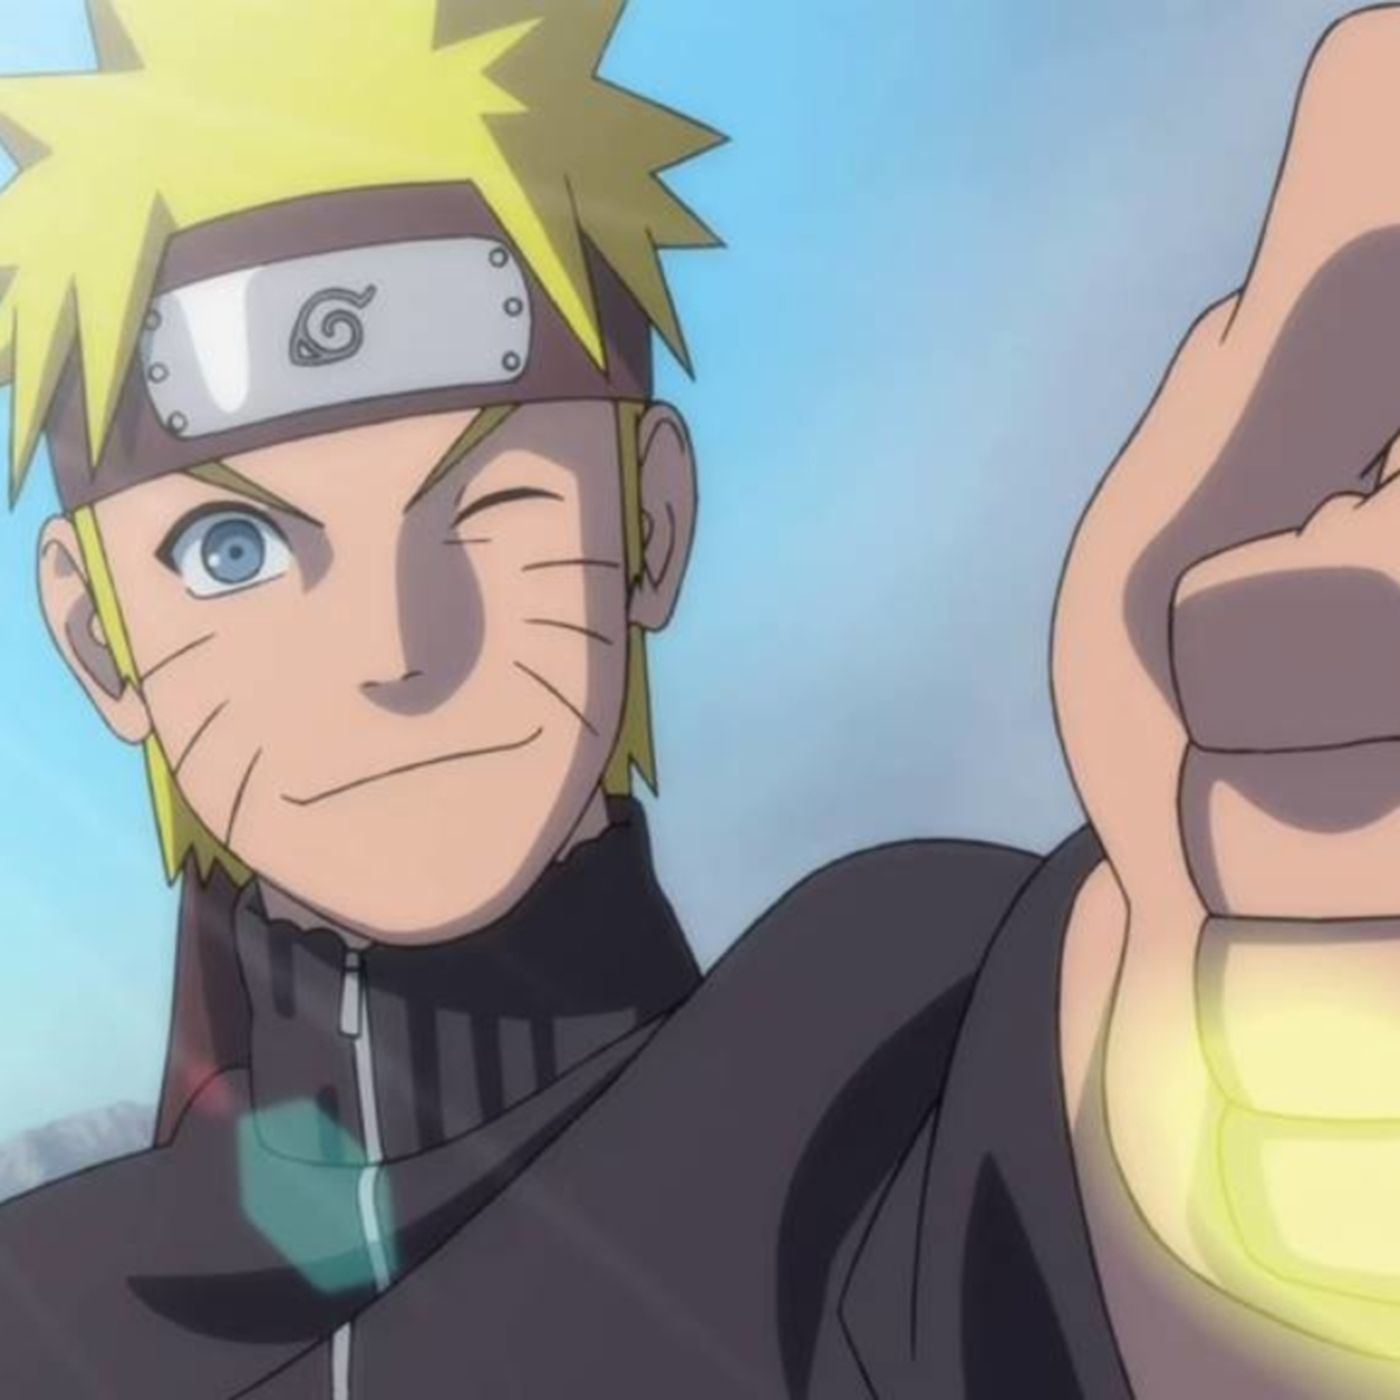 Naruto is coming to an end after being on the air for close to 15